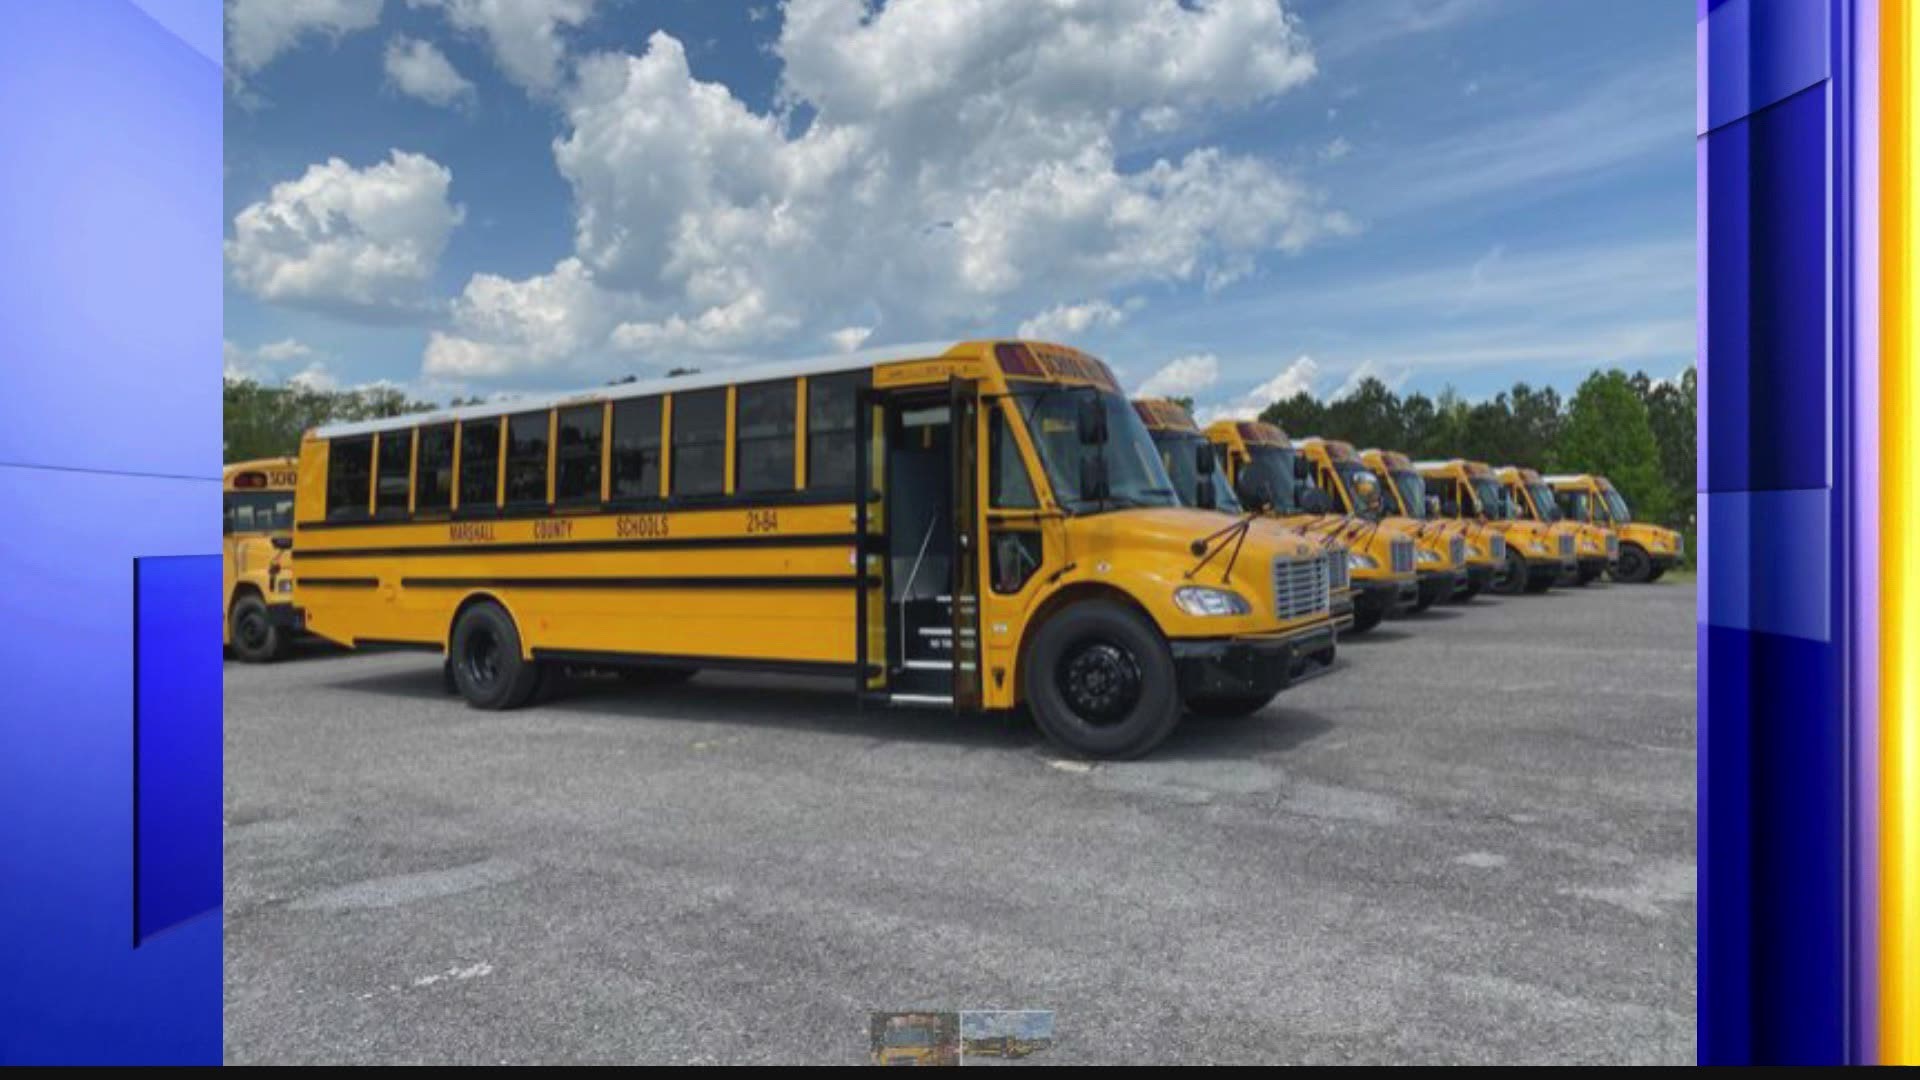 School might not be in session, but when it is, these students will have brand new buses.